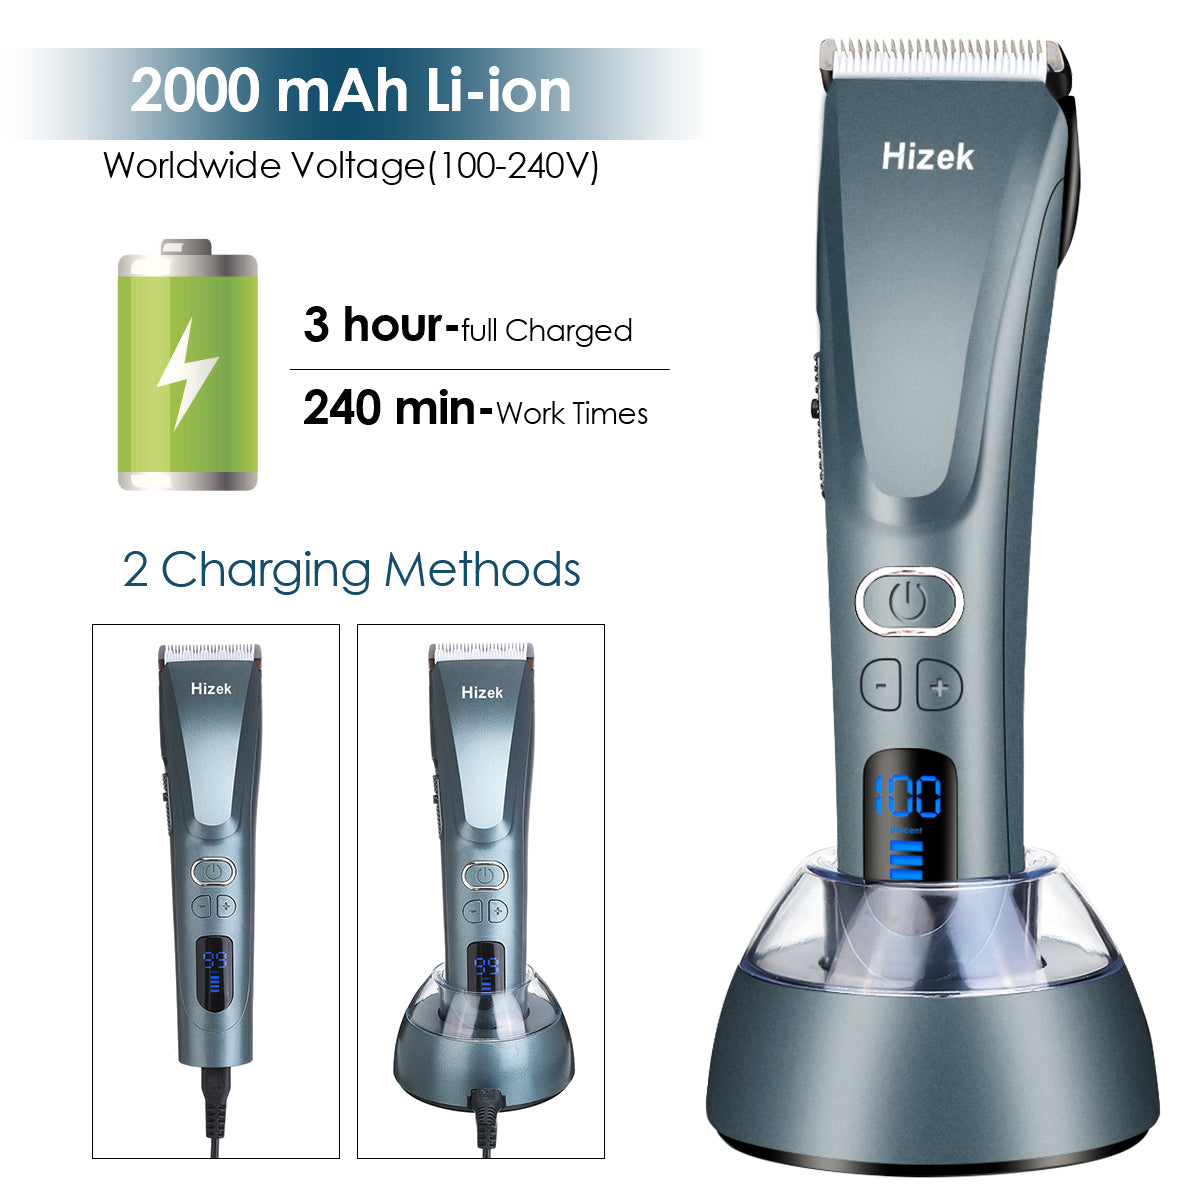 Hair Clippers for Men,Hizek Beard Trimmer Professional Cordless Hair Trimmer with 3 Adjustable Speeds,LED Display,USB Charging Stand and 6 Attachment Guide Combs,for Family Use